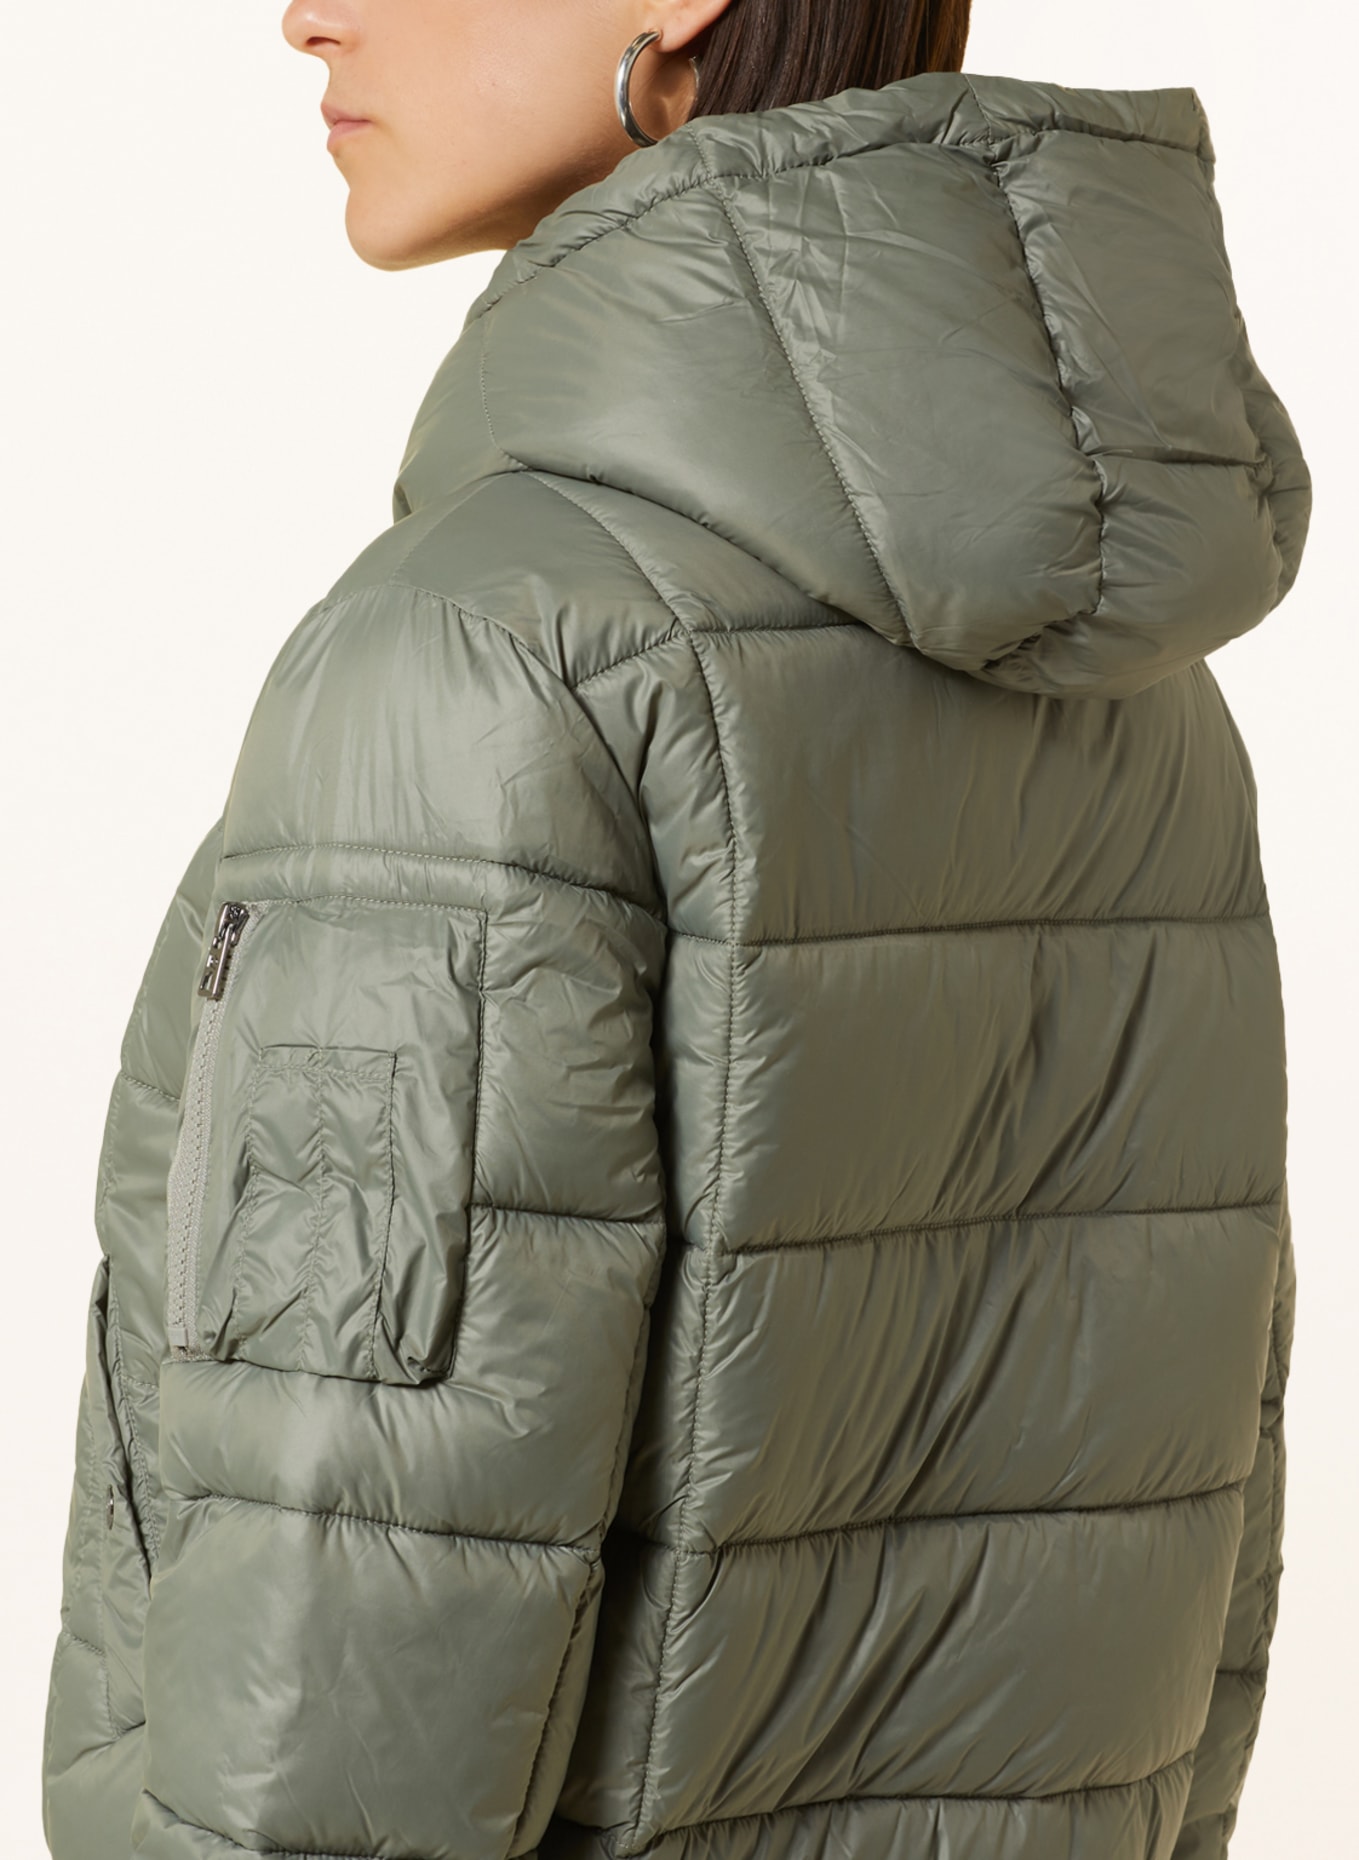 IQ STUDIO Quilted jacket CAROL with DUPONT™ SORONA® insulation, Color: LIGHT GREEN (Image 4)